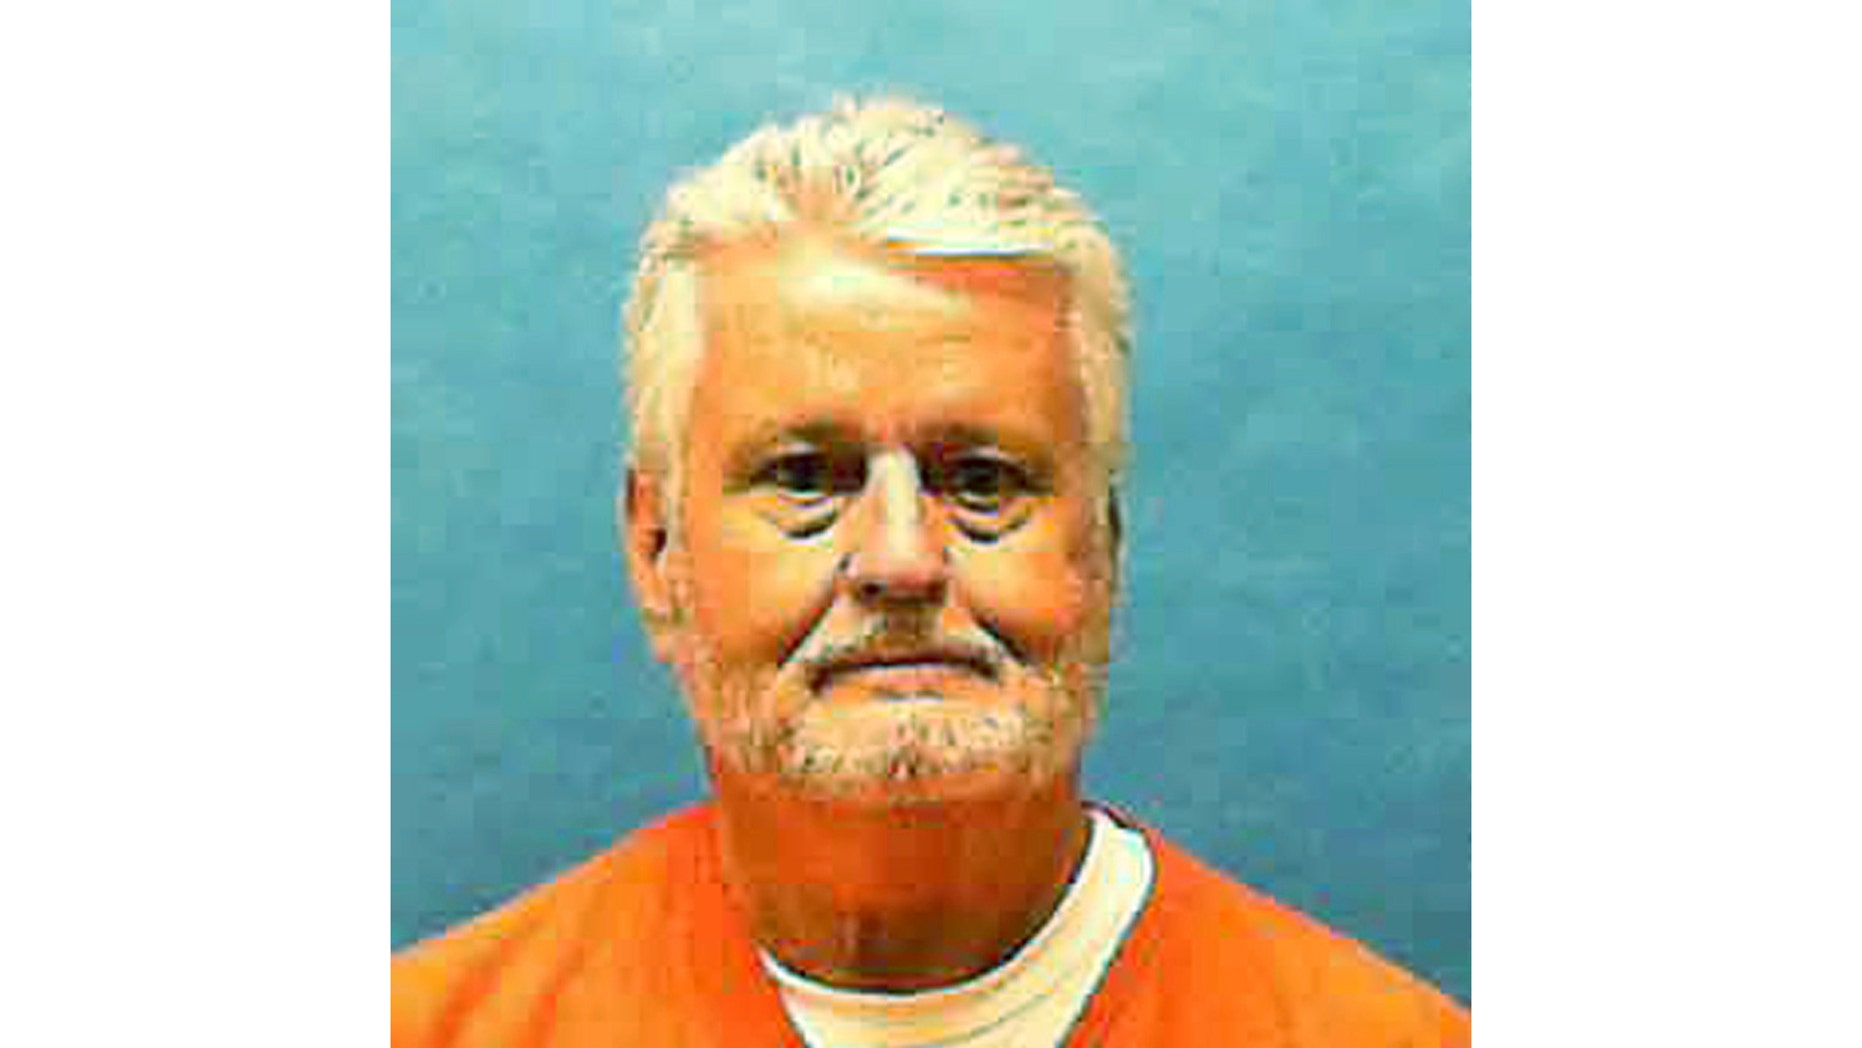 This updated photo, made available by the Florida Law Enforcement Department, shows Bobby Joe Long in detention. Long, is scheduled to be executed on Thursday, May 23, 2019 for killing 10 women for eight months in 1984, terrorizing the Tampa Bay area. He was sentenced to 401 years in prison, 28 life sentences and a death sentence. He is executed for the murder of Michelle Simms, 22 years old. (Florida Police Department via AP)